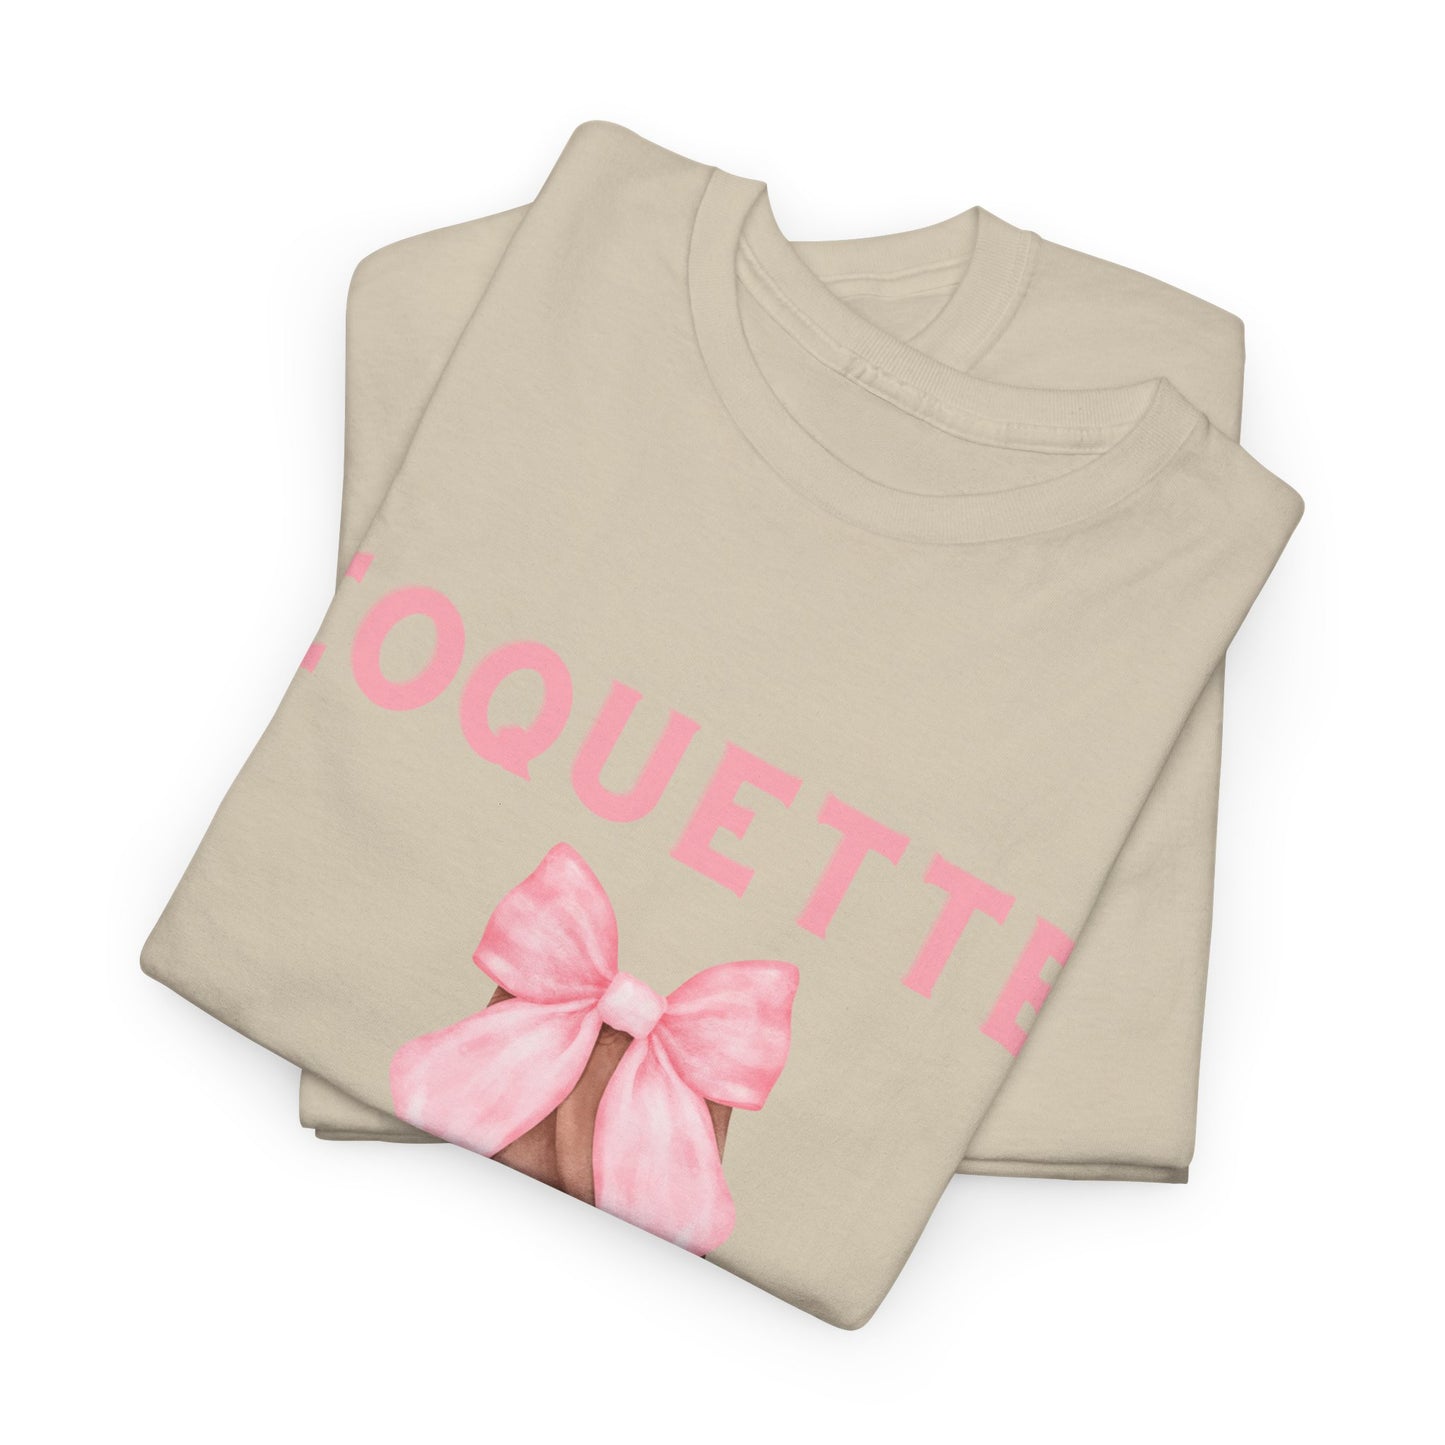 Coquette Cowgirl Bow & Boots Women's Plus Short Sleeved Cotton Tee Size xl-5xl